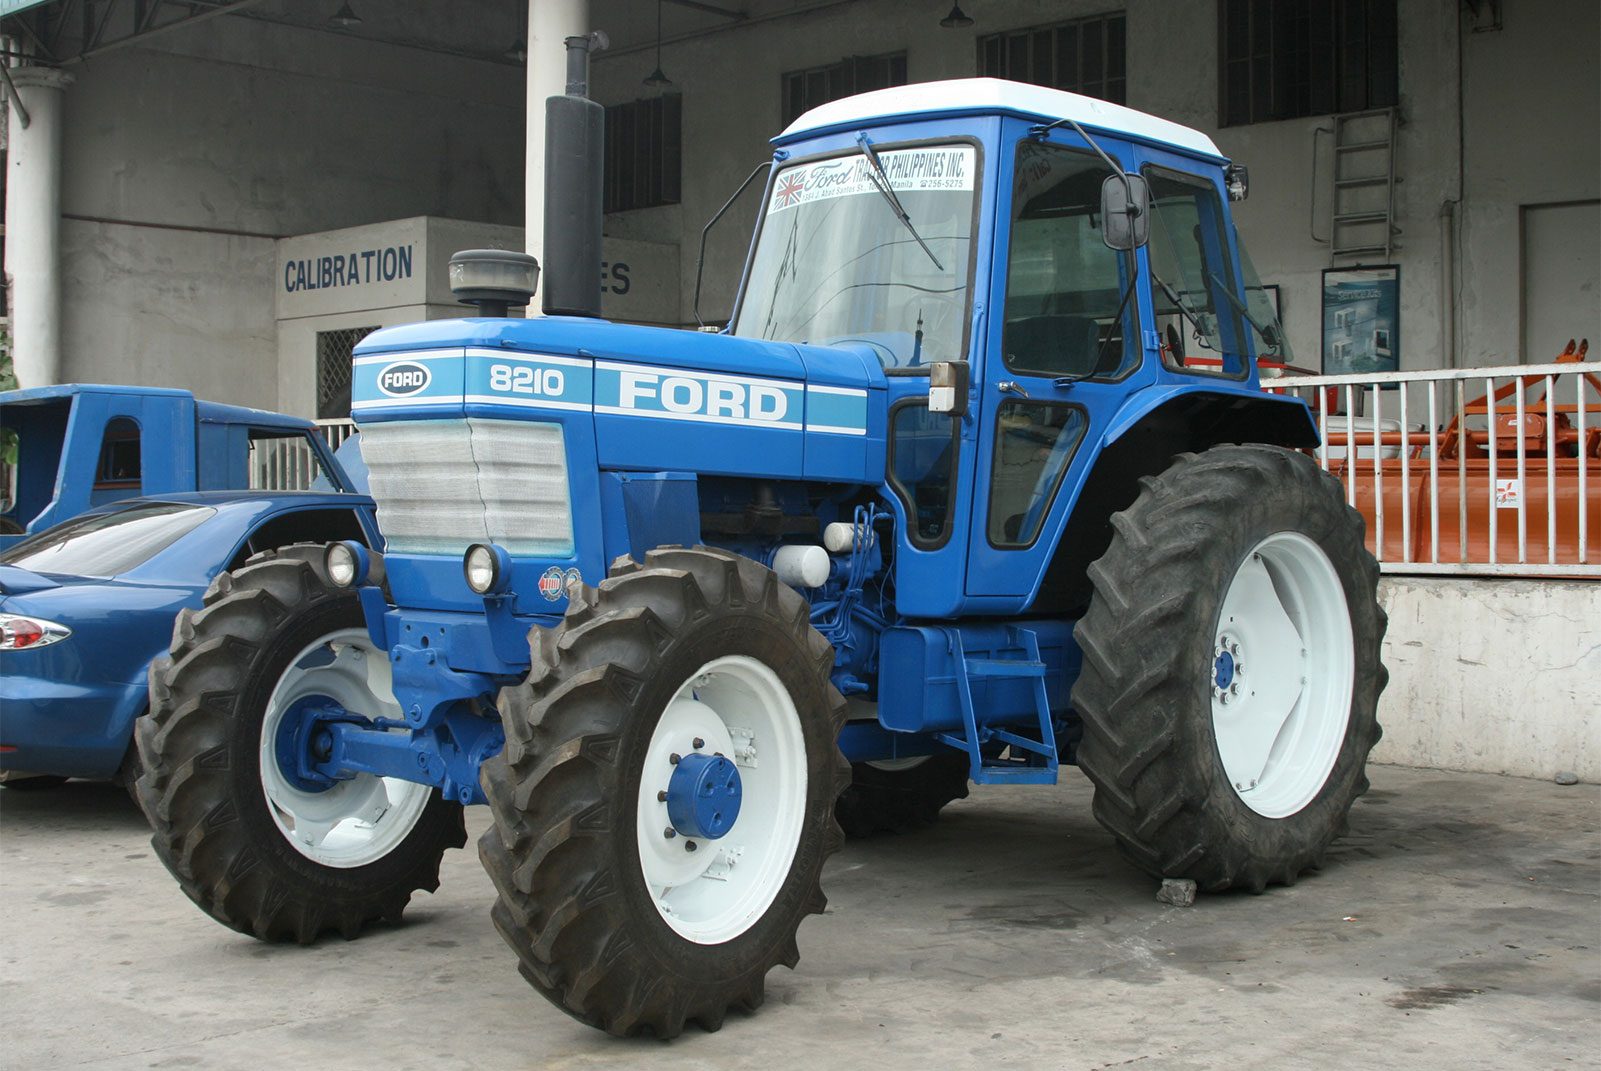 FORD 8210